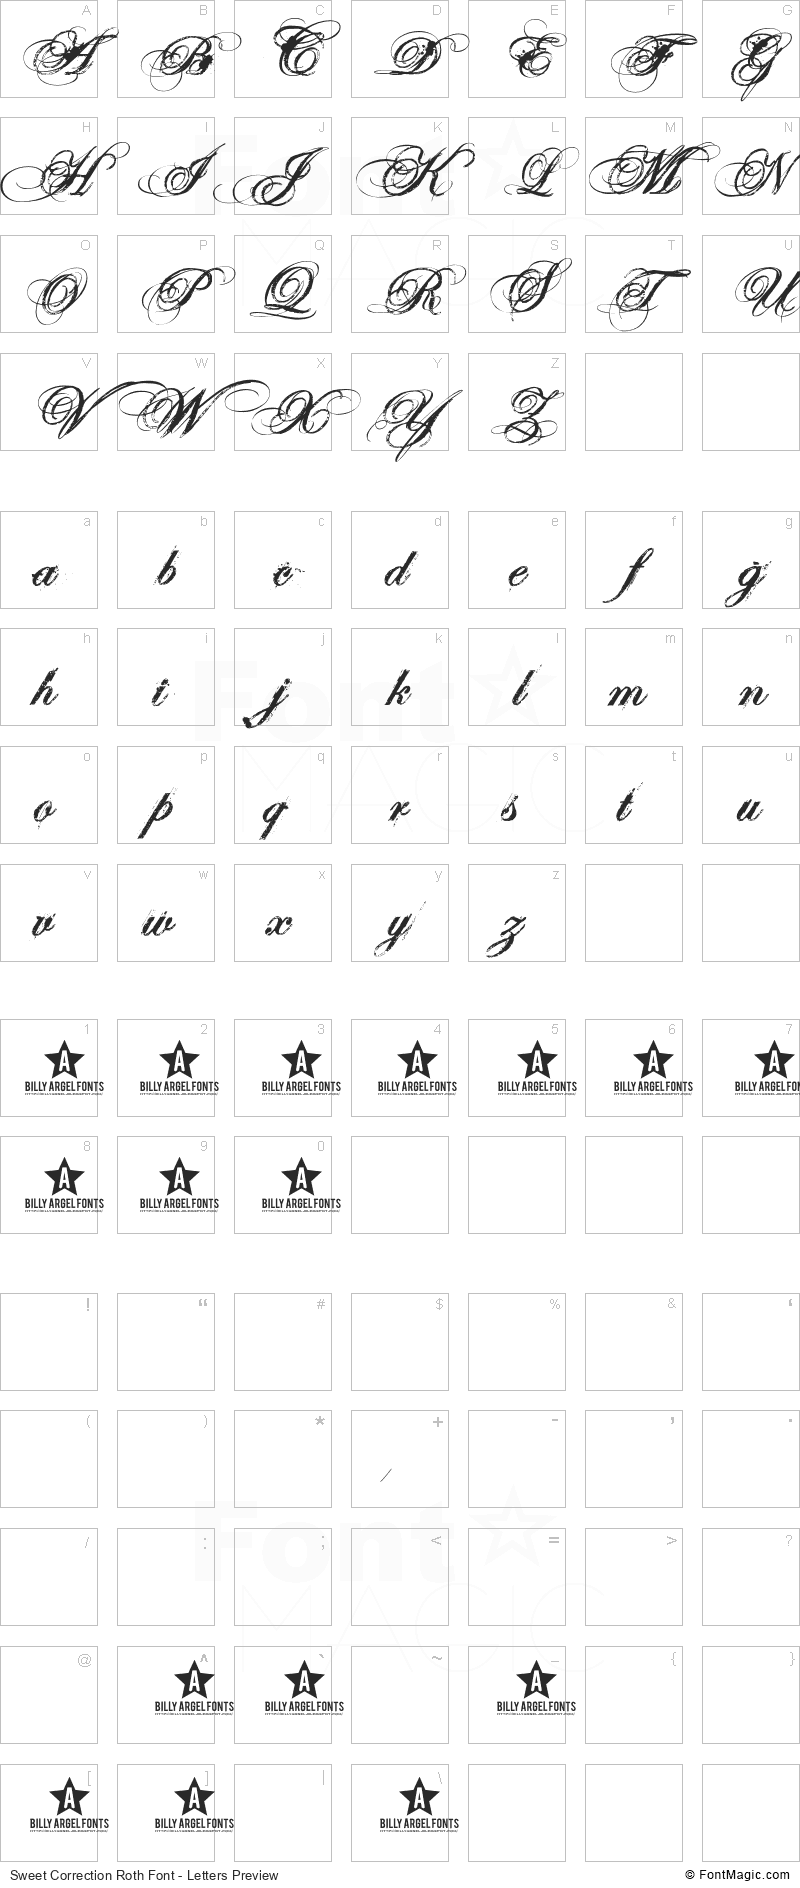 Sweet Correction Roth Font - All Latters Preview Chart